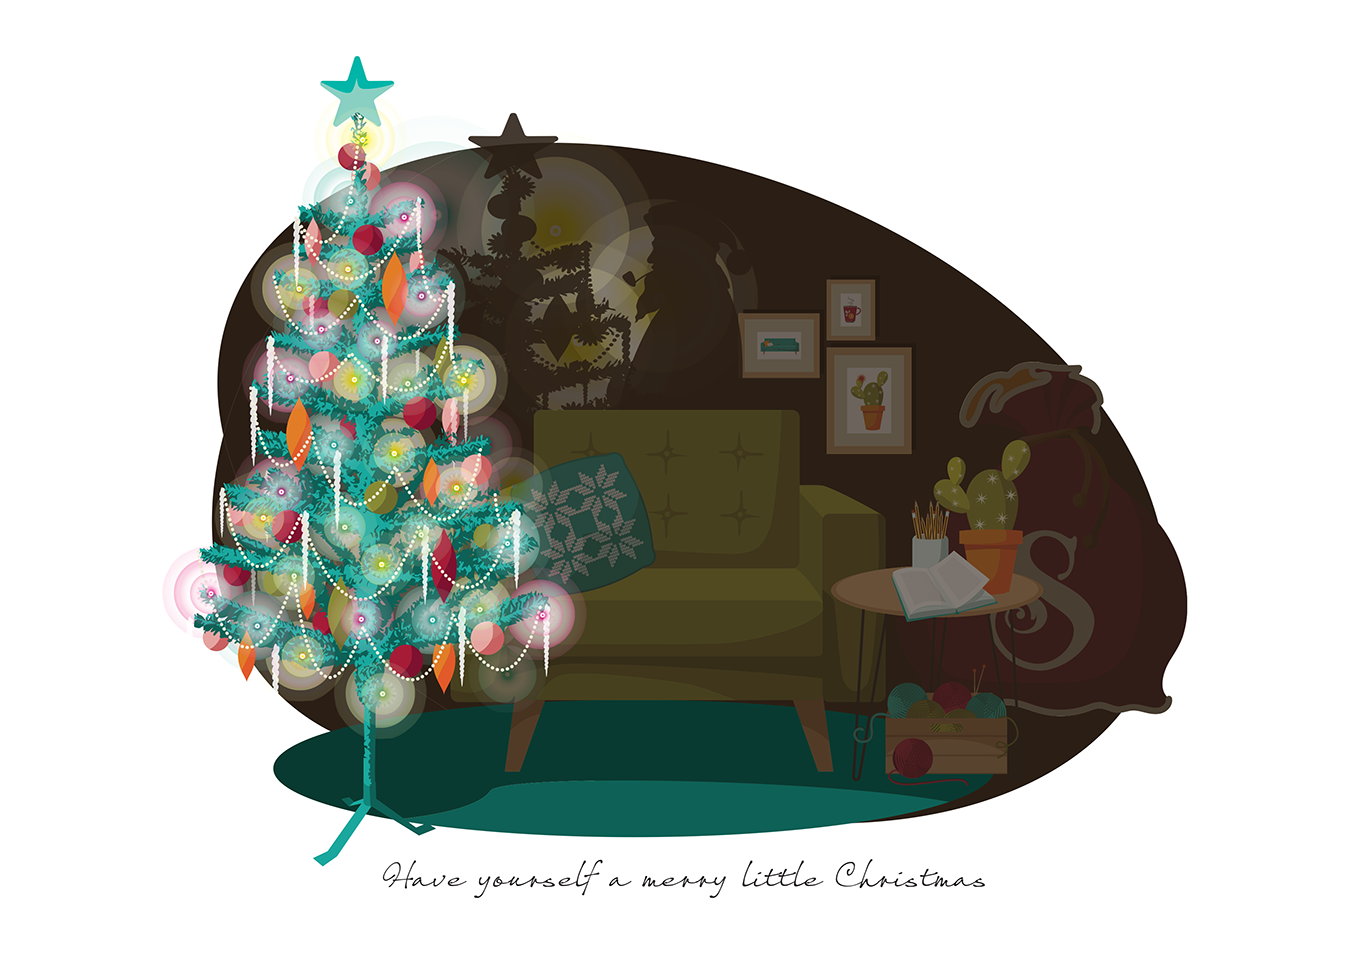 Christmas scene illustration featuring retro style tree and furniture